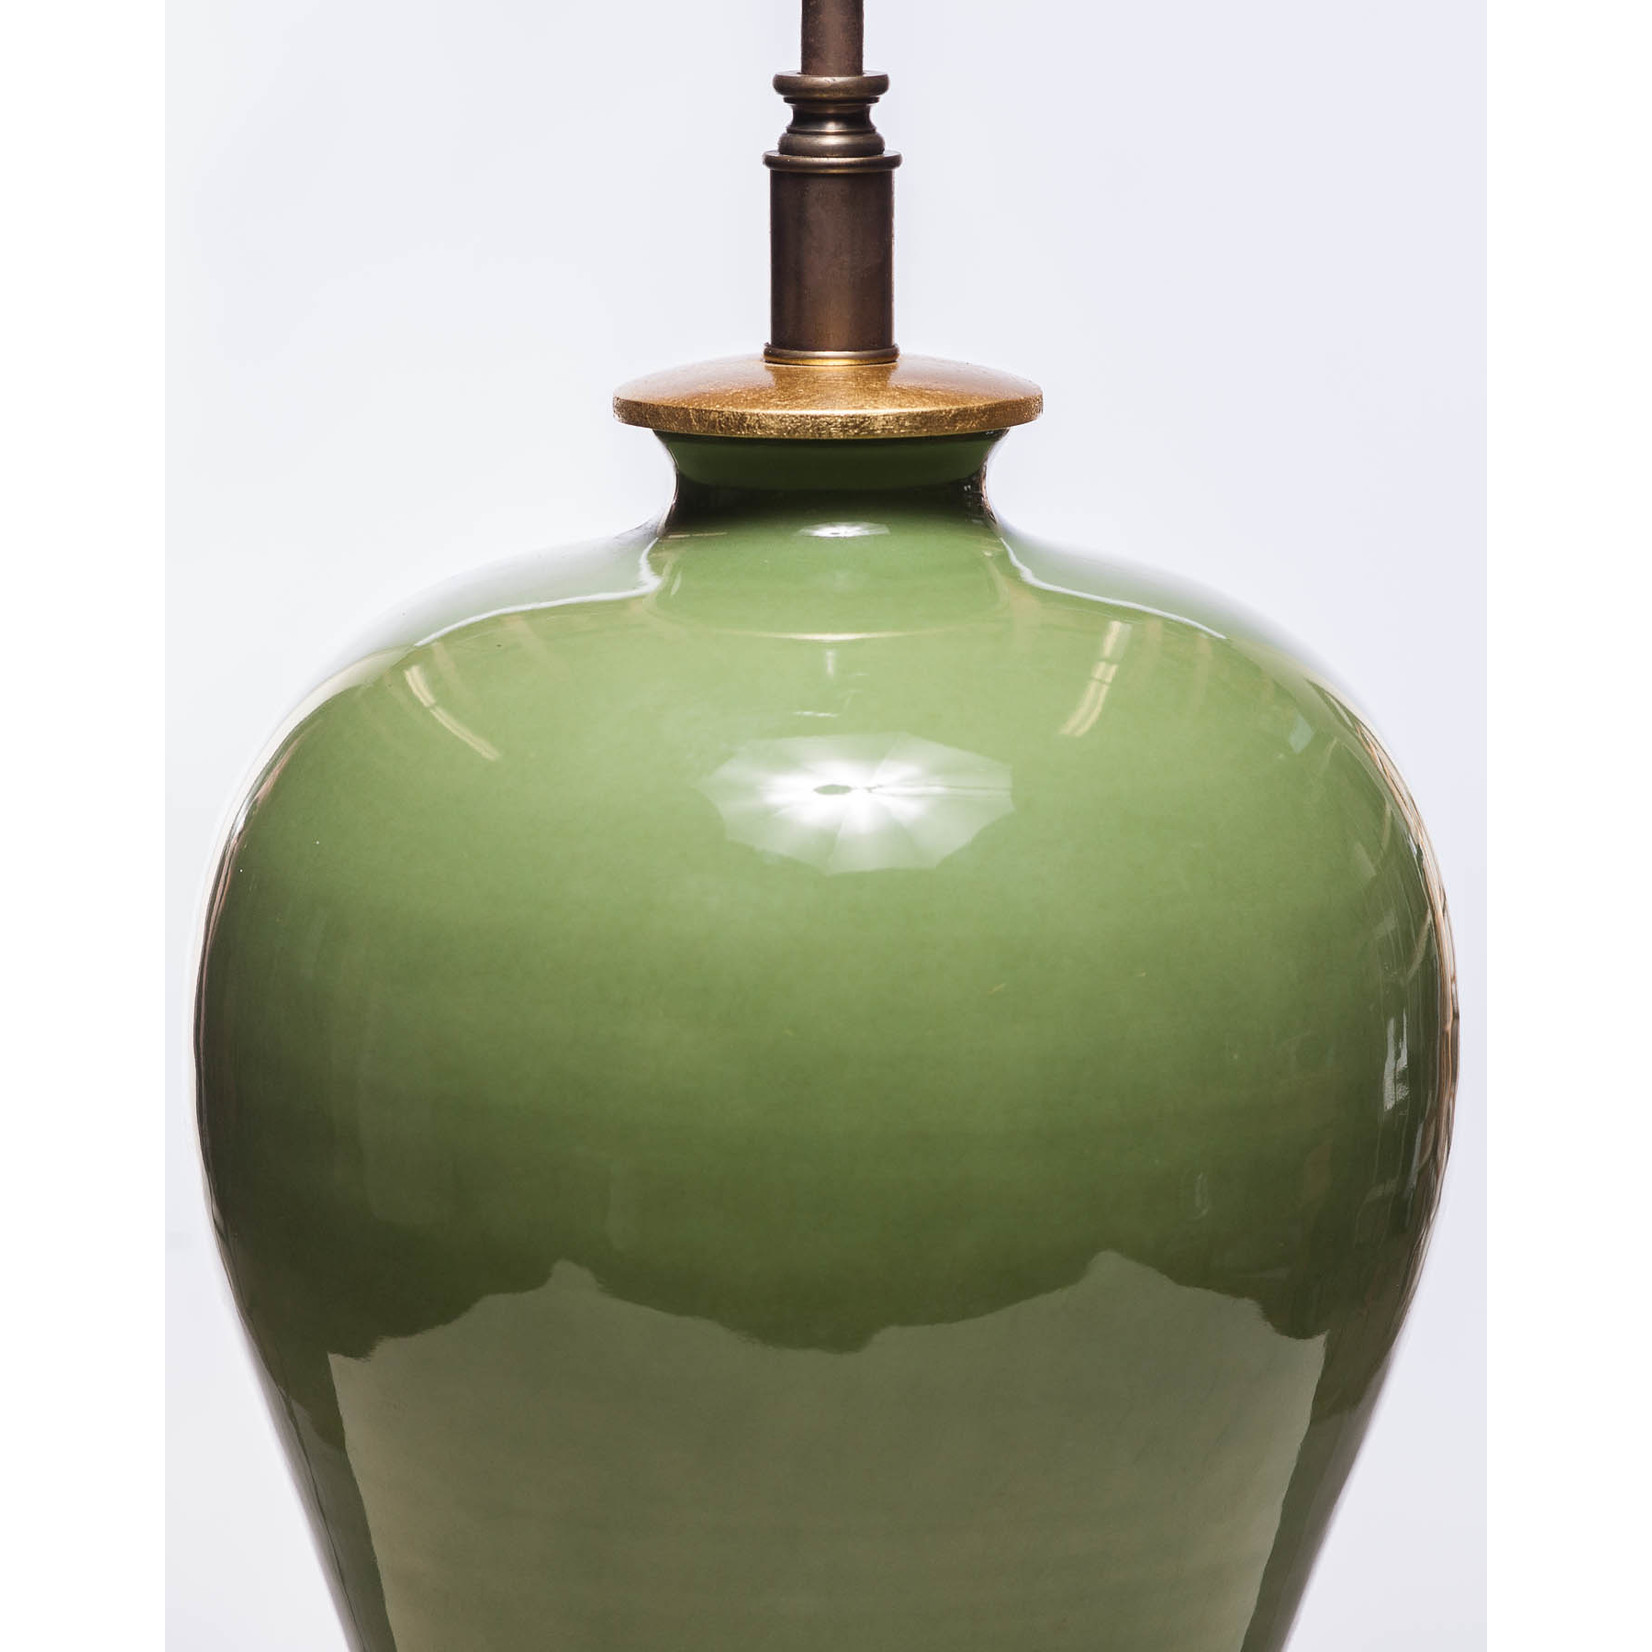 Lawrence & Scott Dashiell Table Lamp in Celadon with Gilded Gold Base